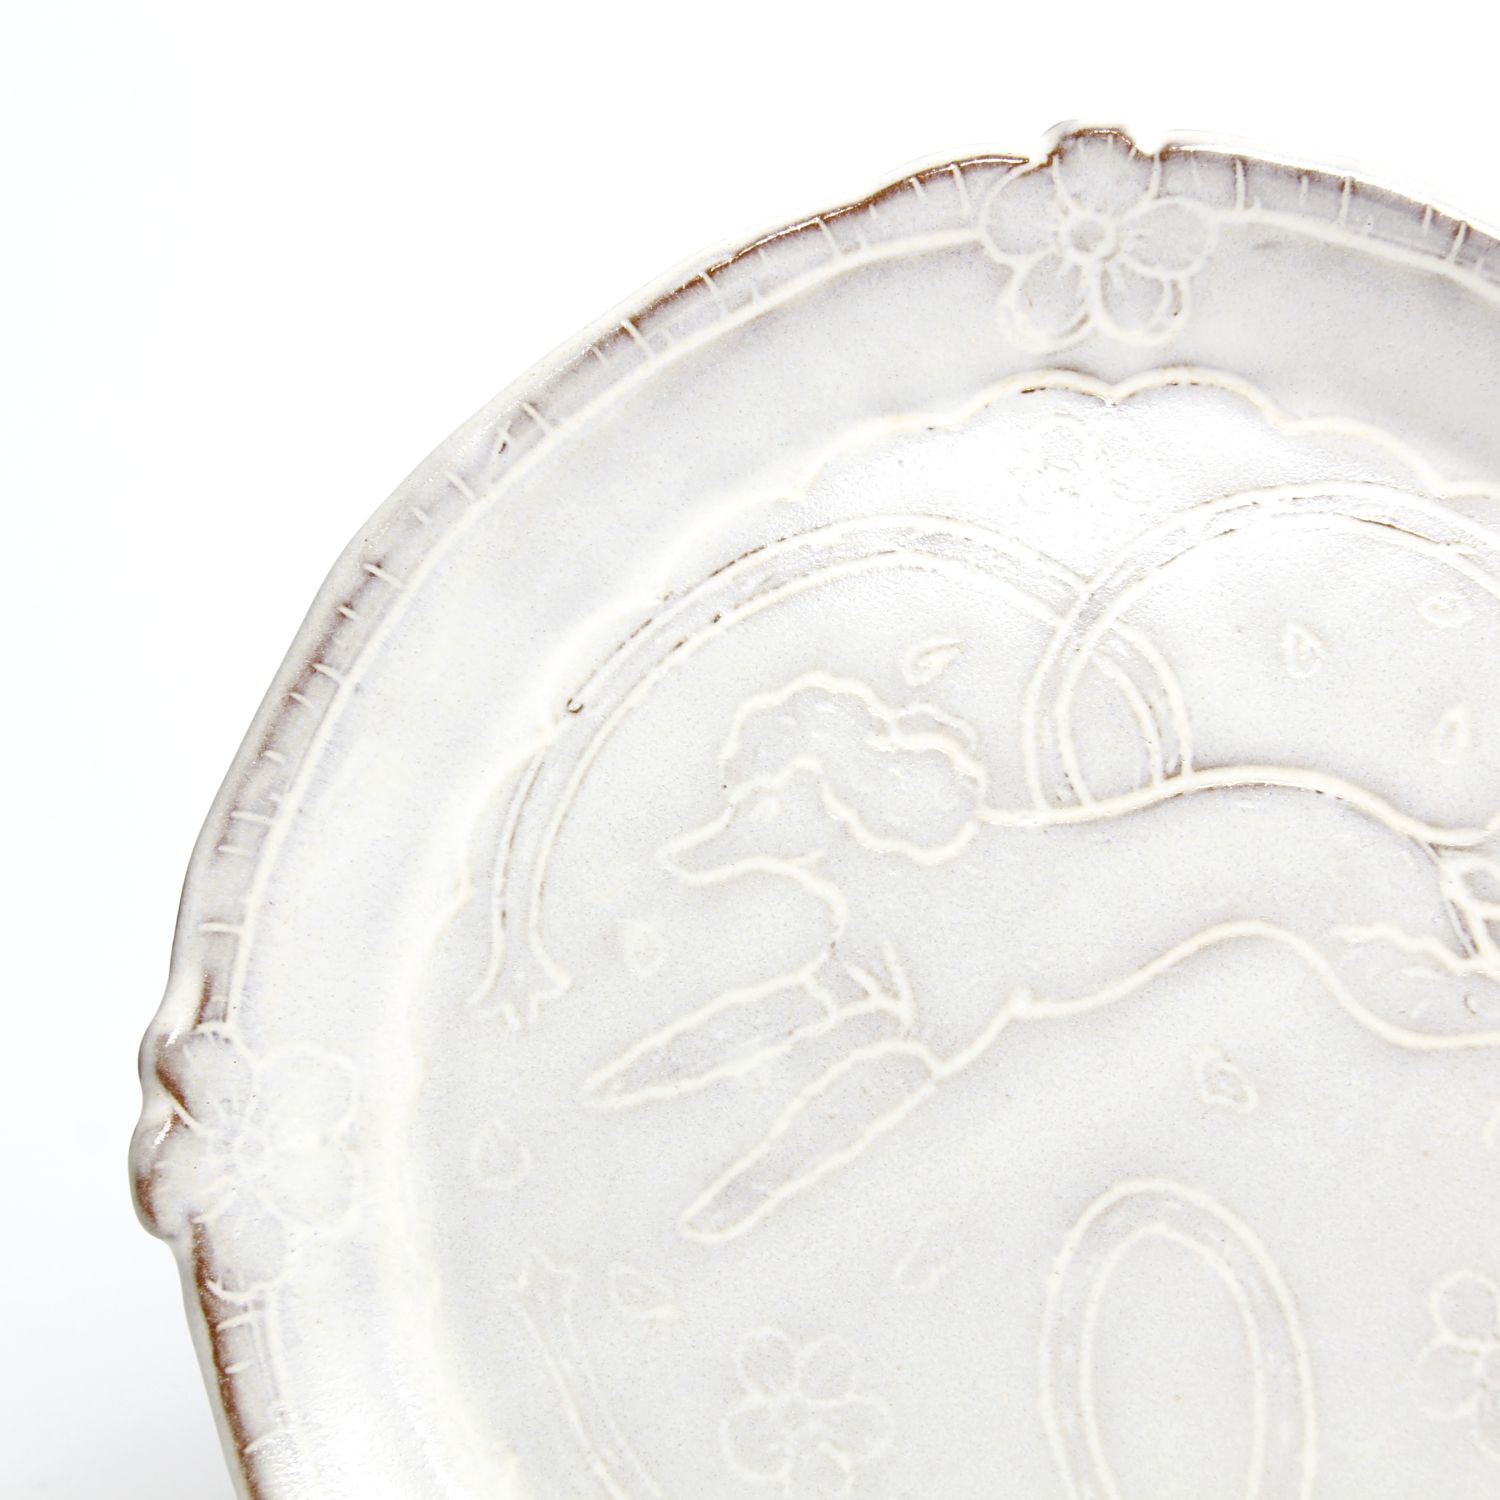 Zoe Pinnell: Small White Poodle Plate Product Image 2 of 3